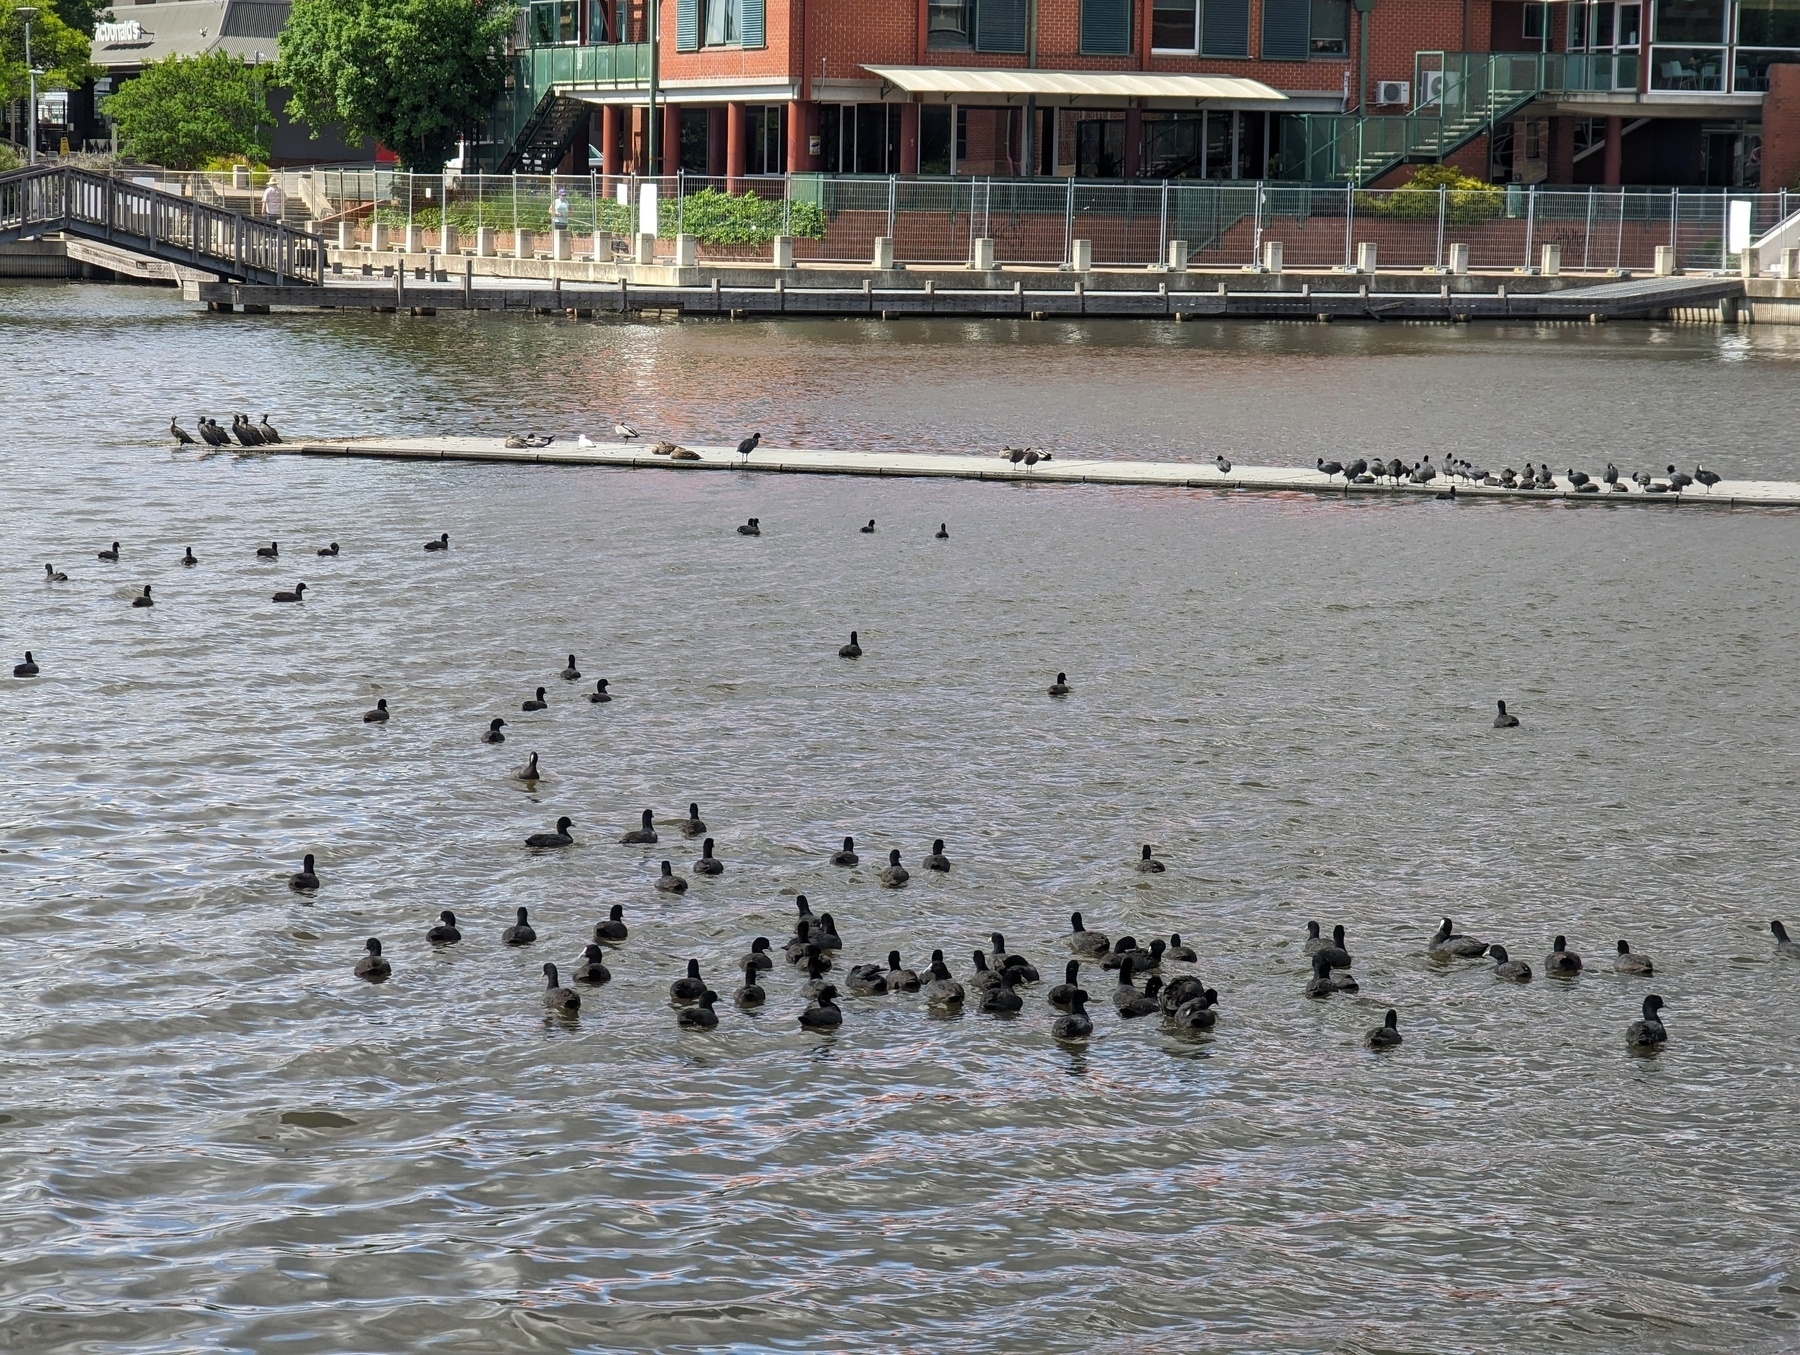 Large flock of Euroasian Coots swimming towards a pier of which other birds were preening. Buildings and a footbridge by the waterline in the background.